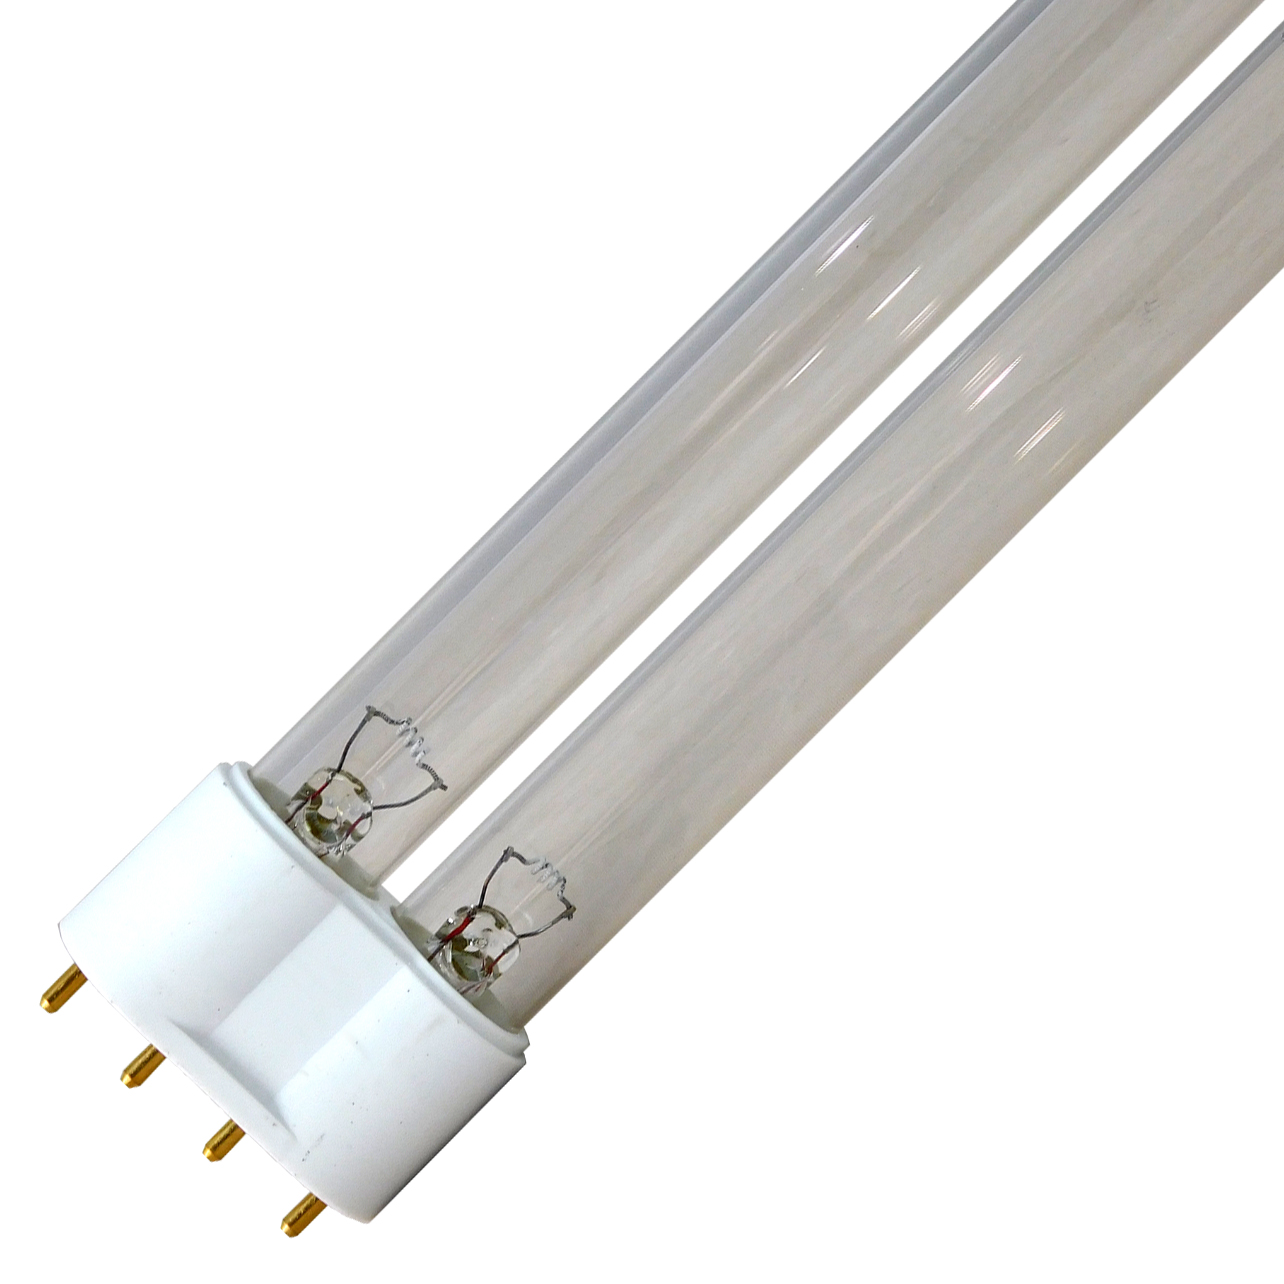 UV BULB PLL 24w 4-PIN UVC LAMP TUBE REPLACEMENT SPARE GARDEN POND Pisces 2g11 